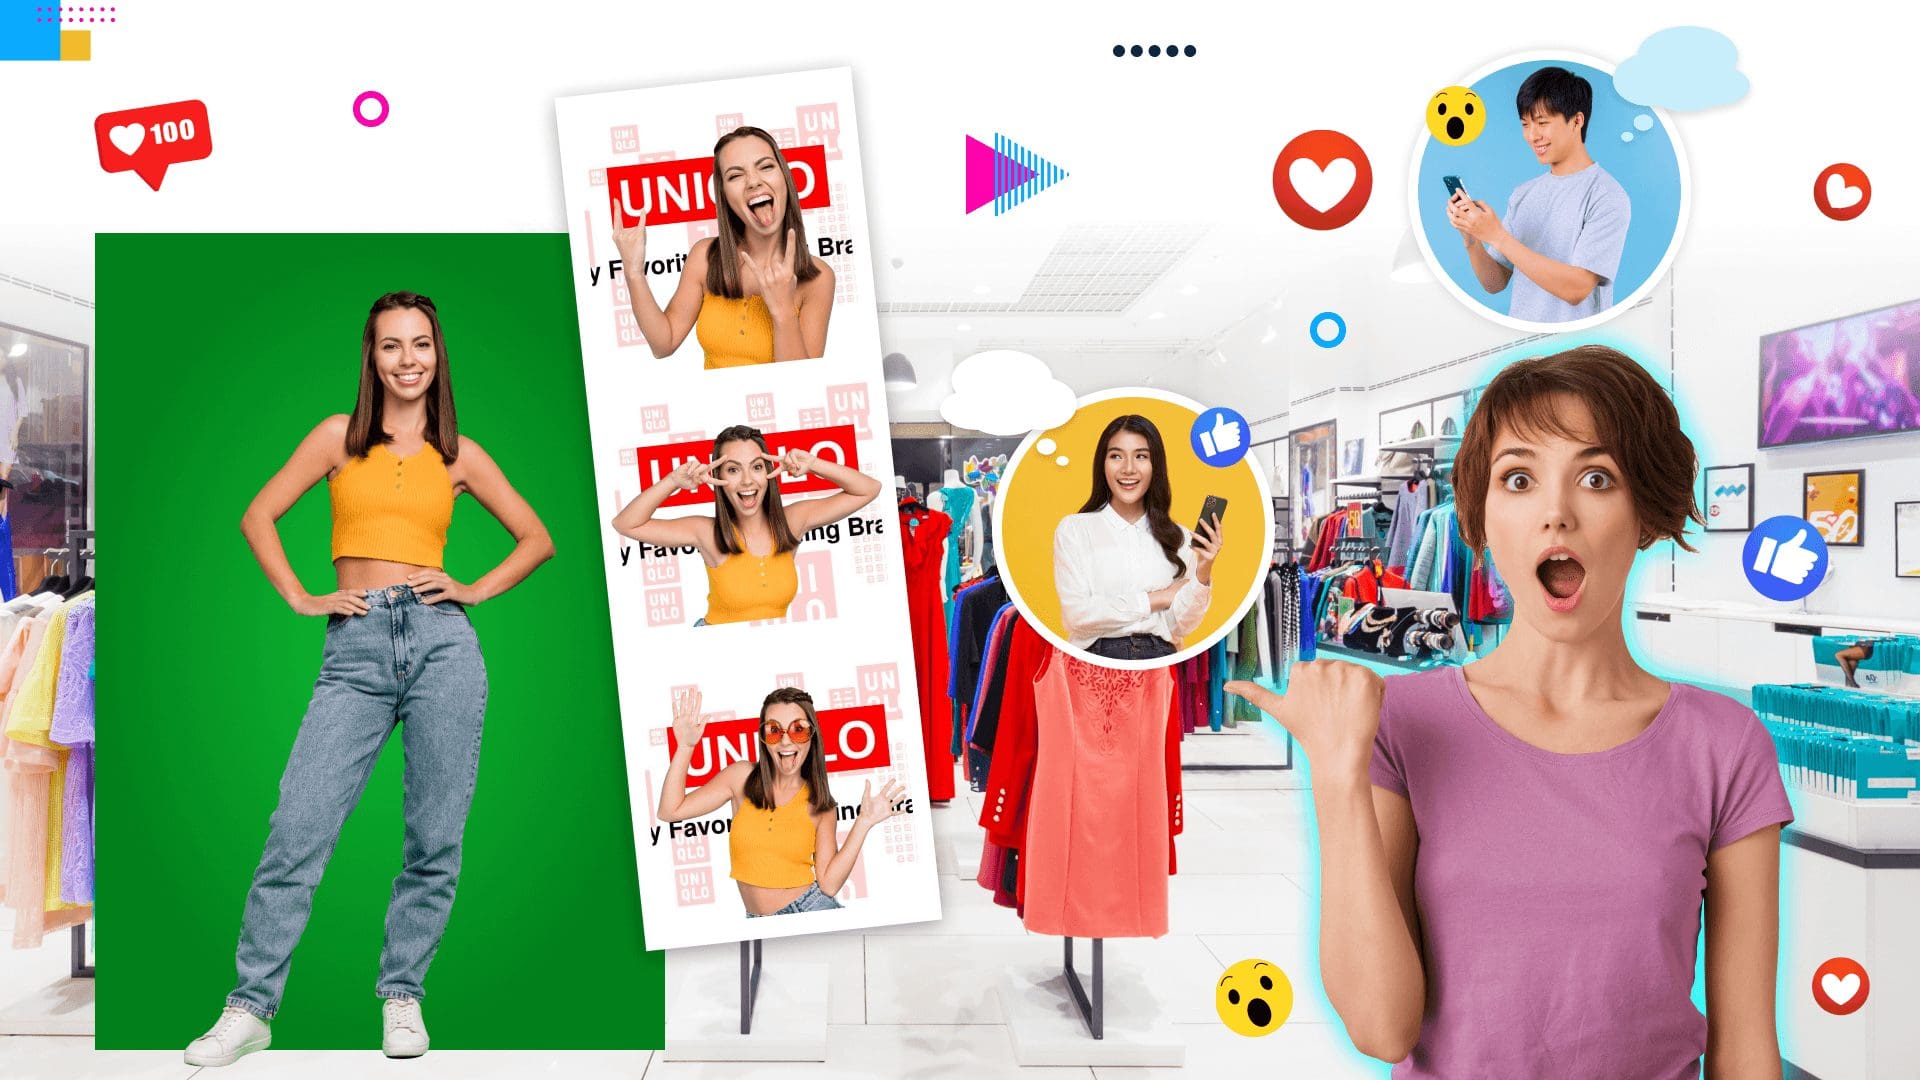 Use a green screen photo booth for in-store experiential marketing